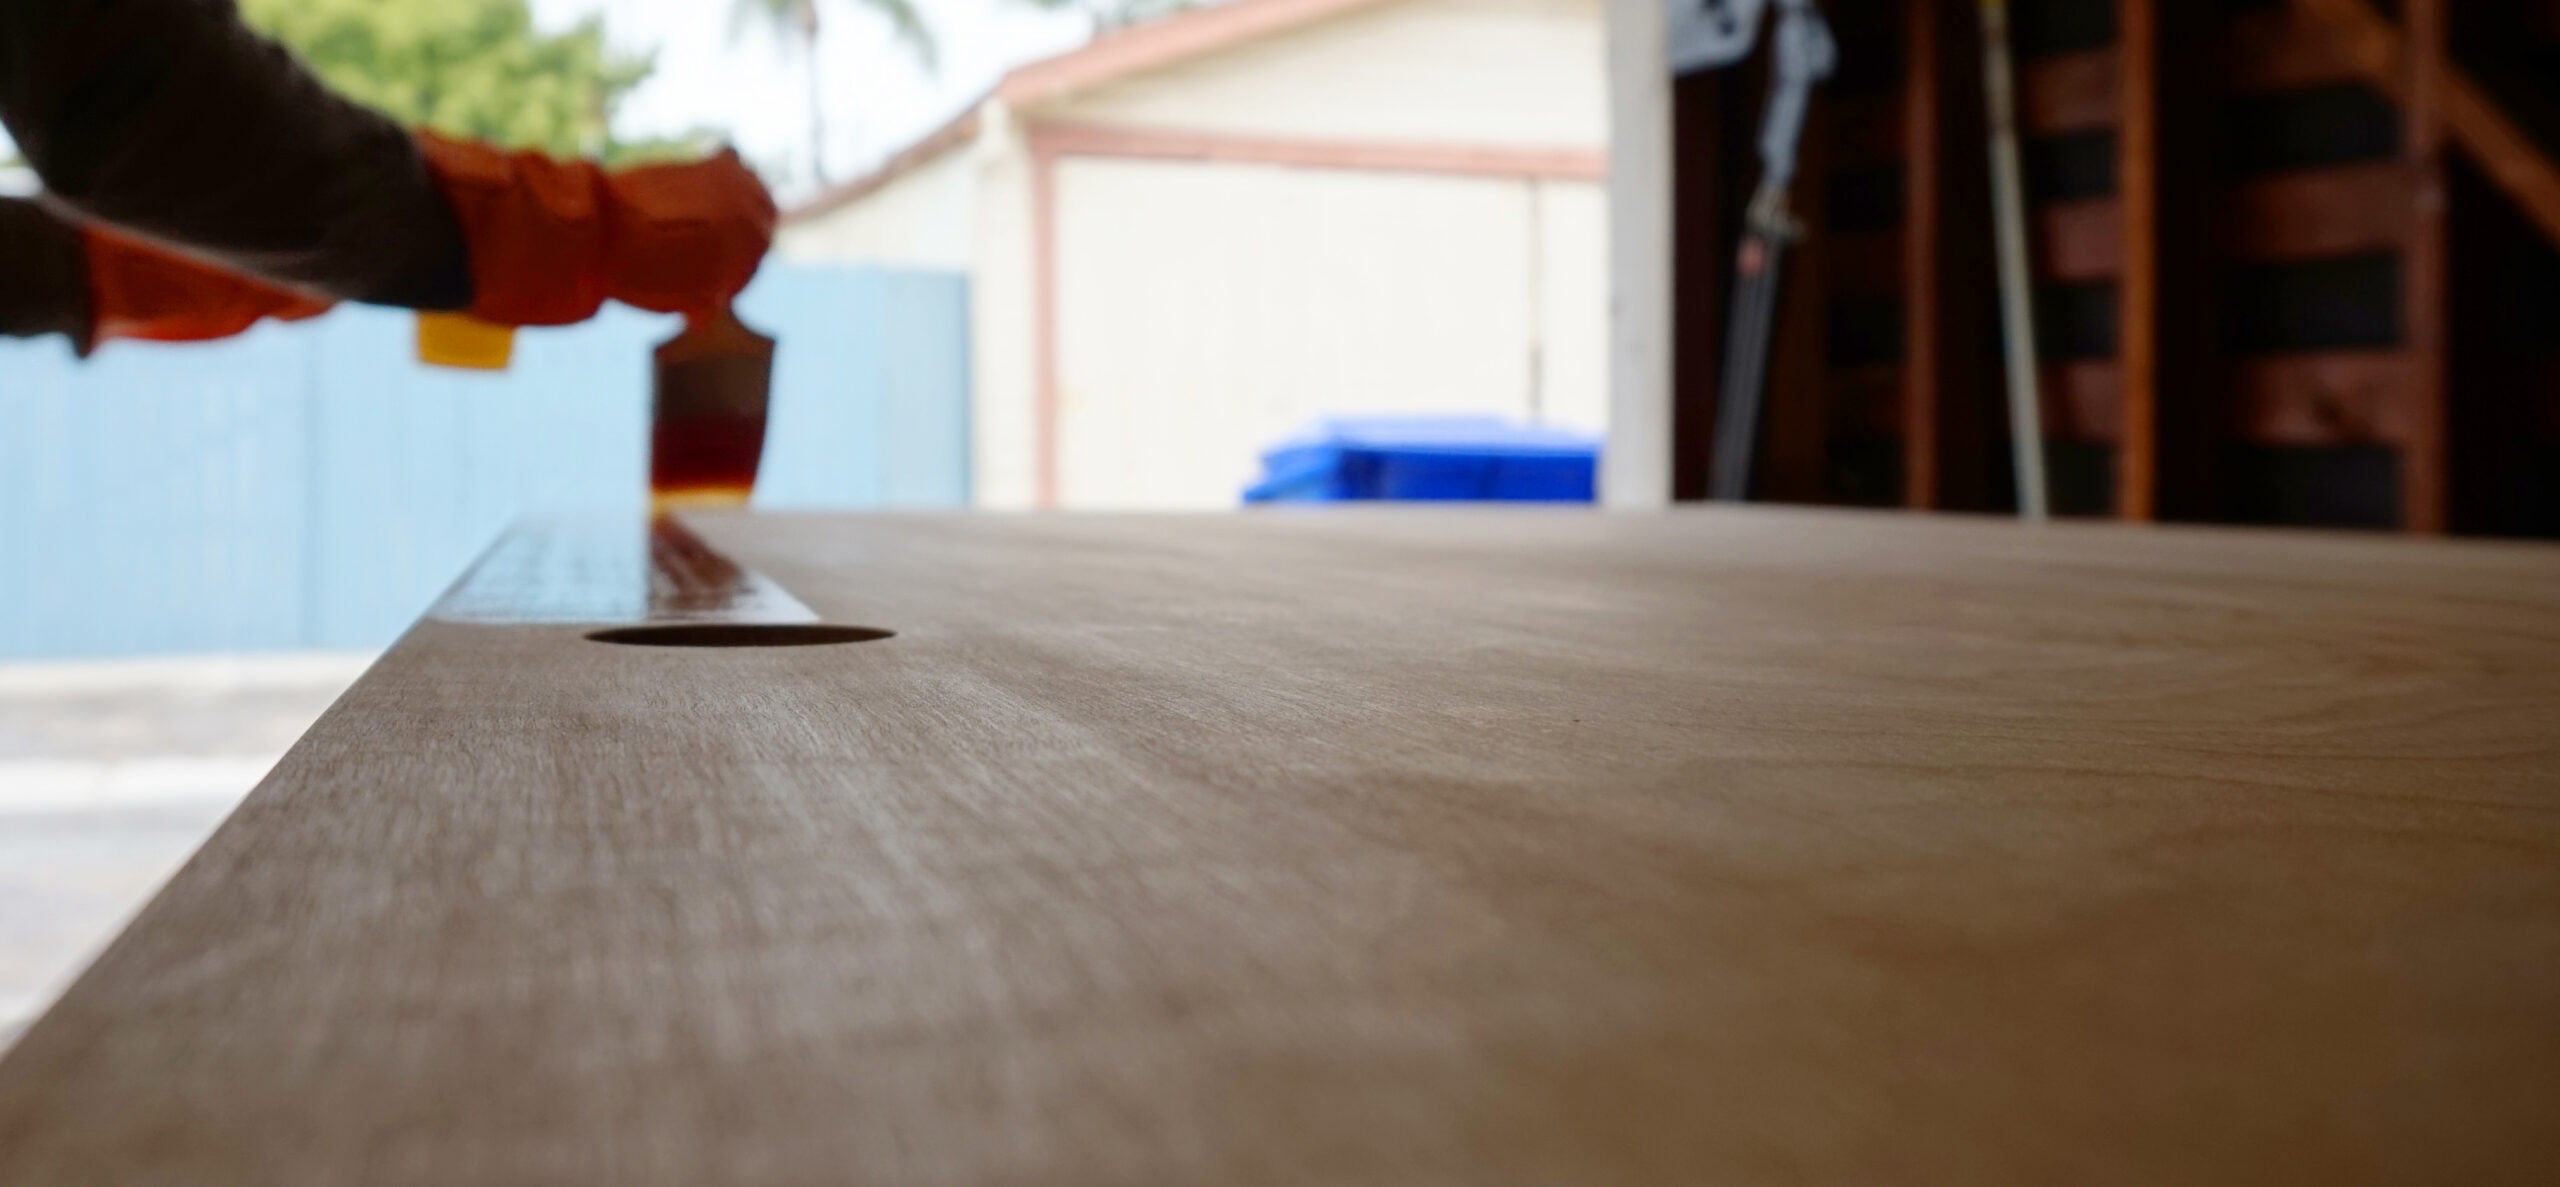 Build Your Own Desk With Custom Features Like Usb Ports And Biometrics